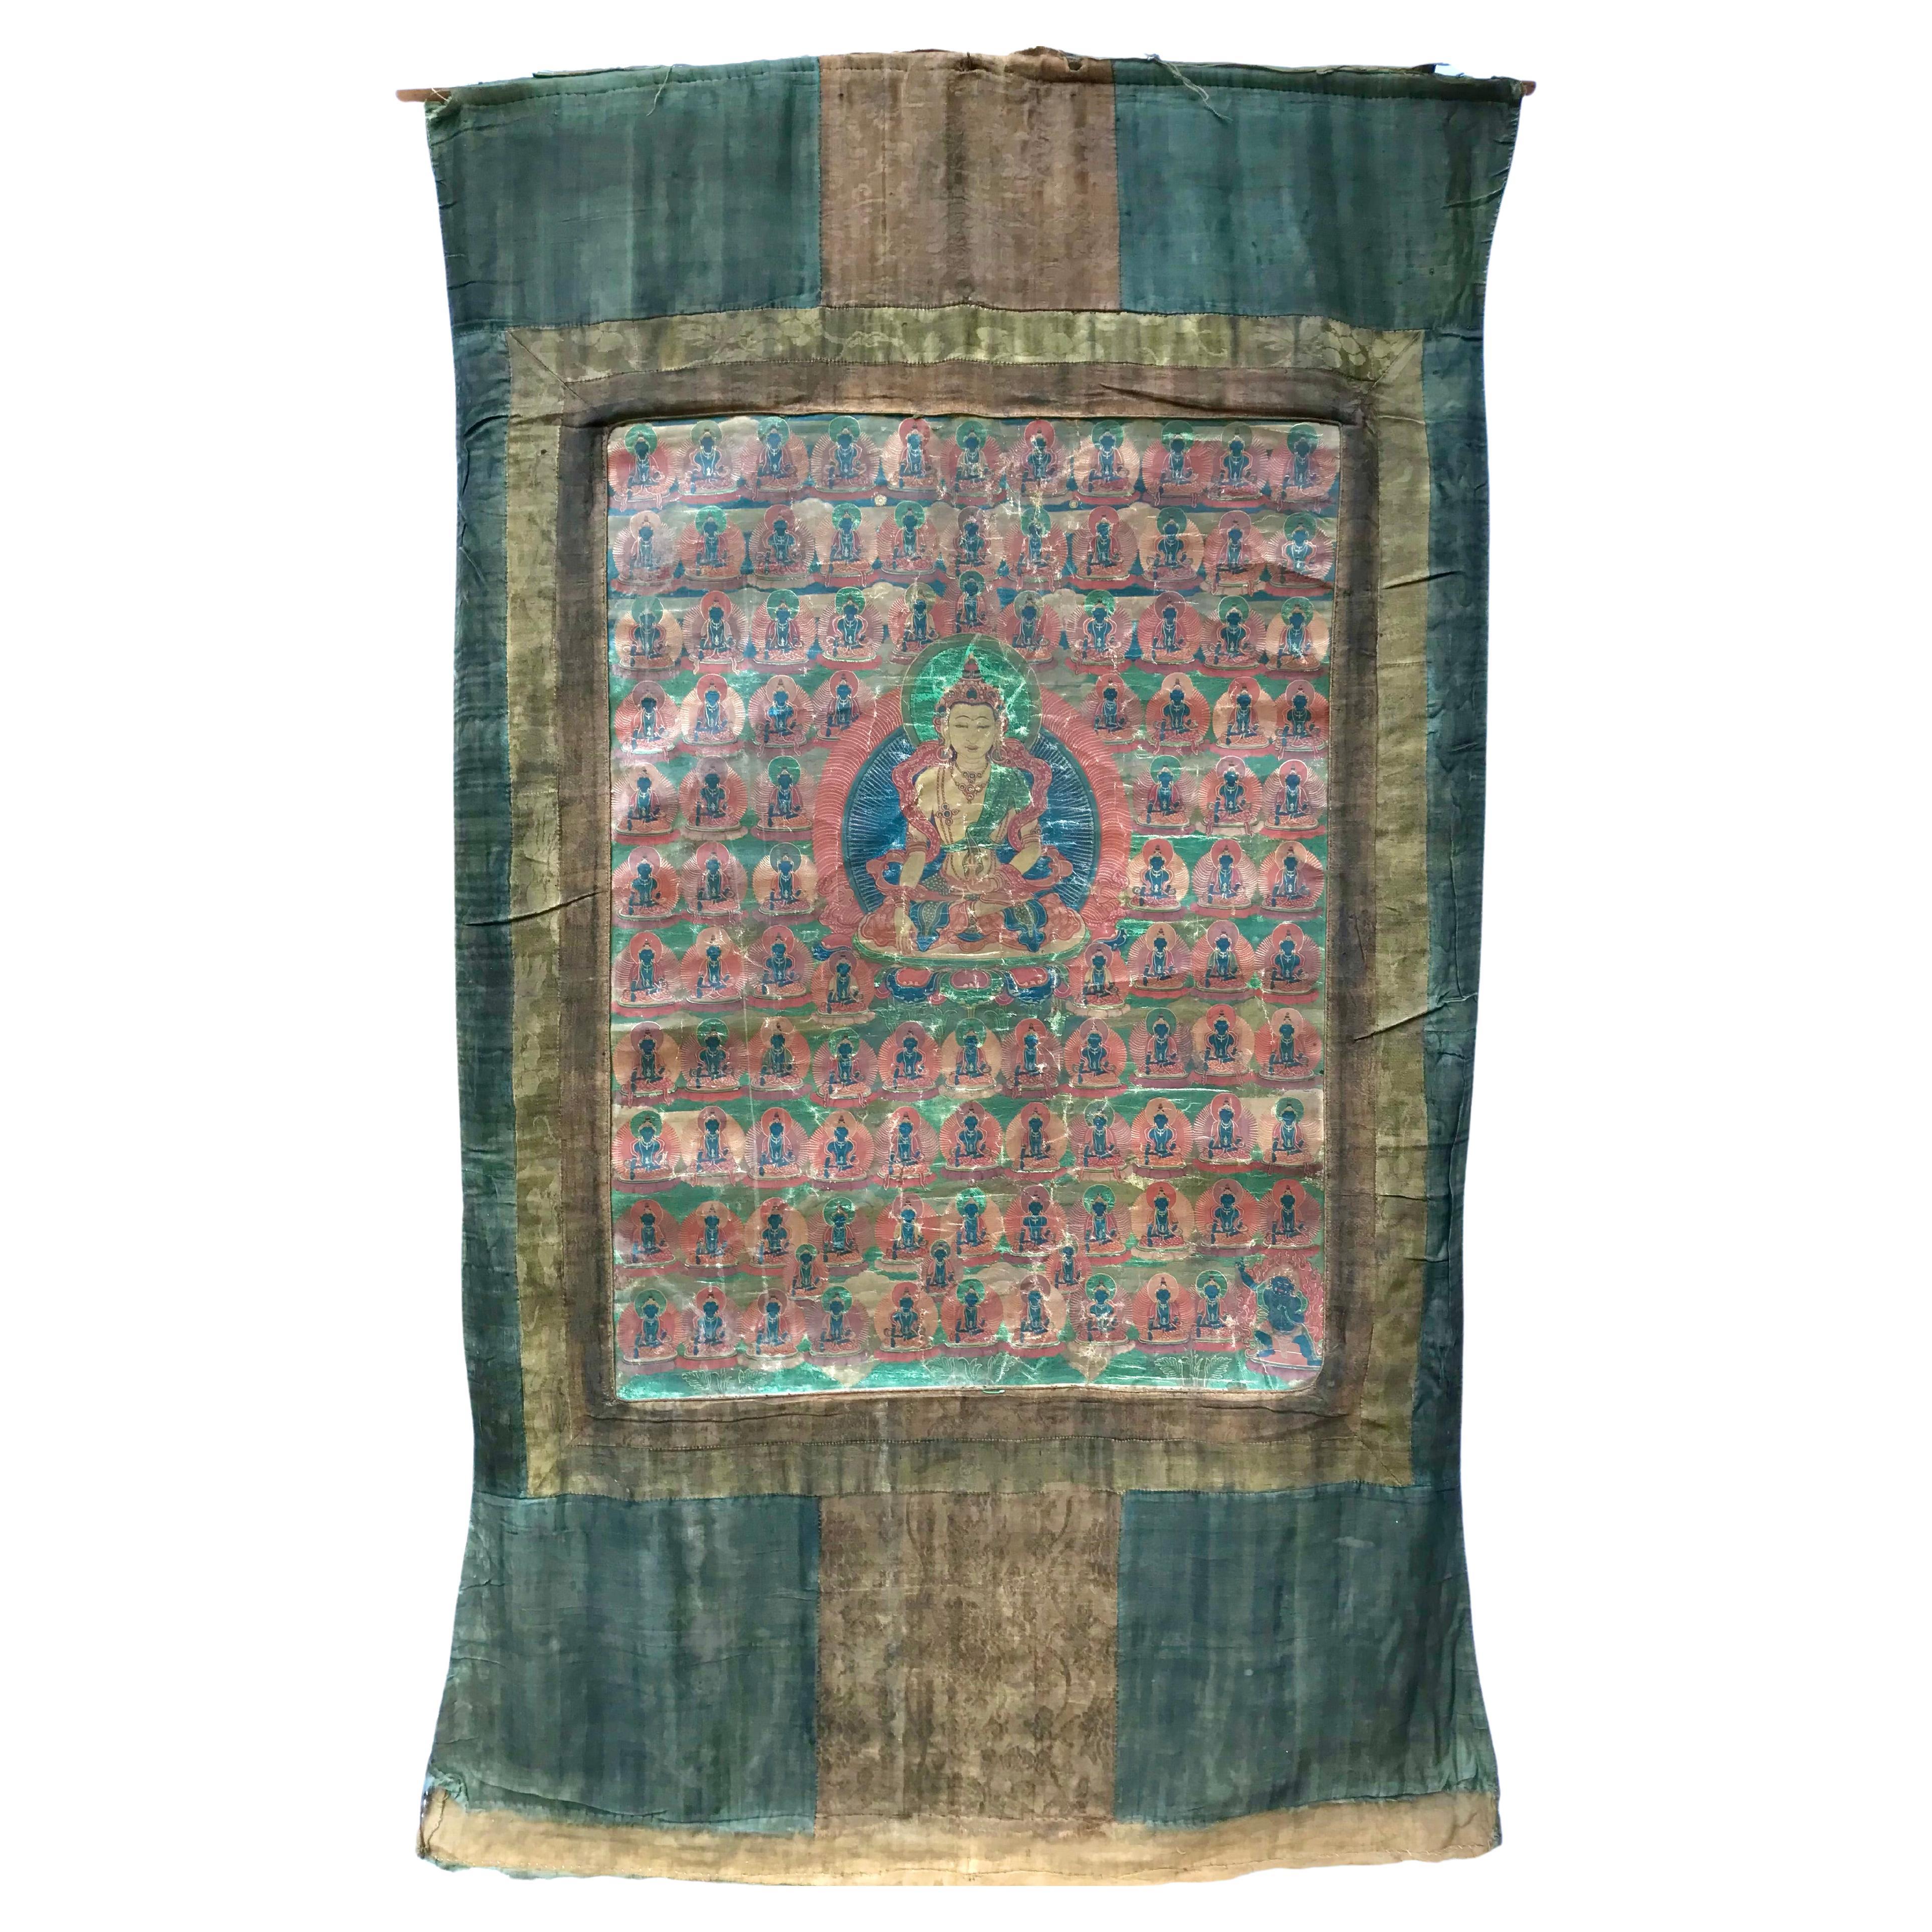 A THANGKA DEPICTING AMITAYUS, 18TH CENTURY

Tibet. Distemper on cloth, with a silk brocade frame, mounted as a hanging scroll with wood handles. Finely painted with Amitayus seated in dhyanasana atop a lotus throne, his hands in bhumisparsamudra, a